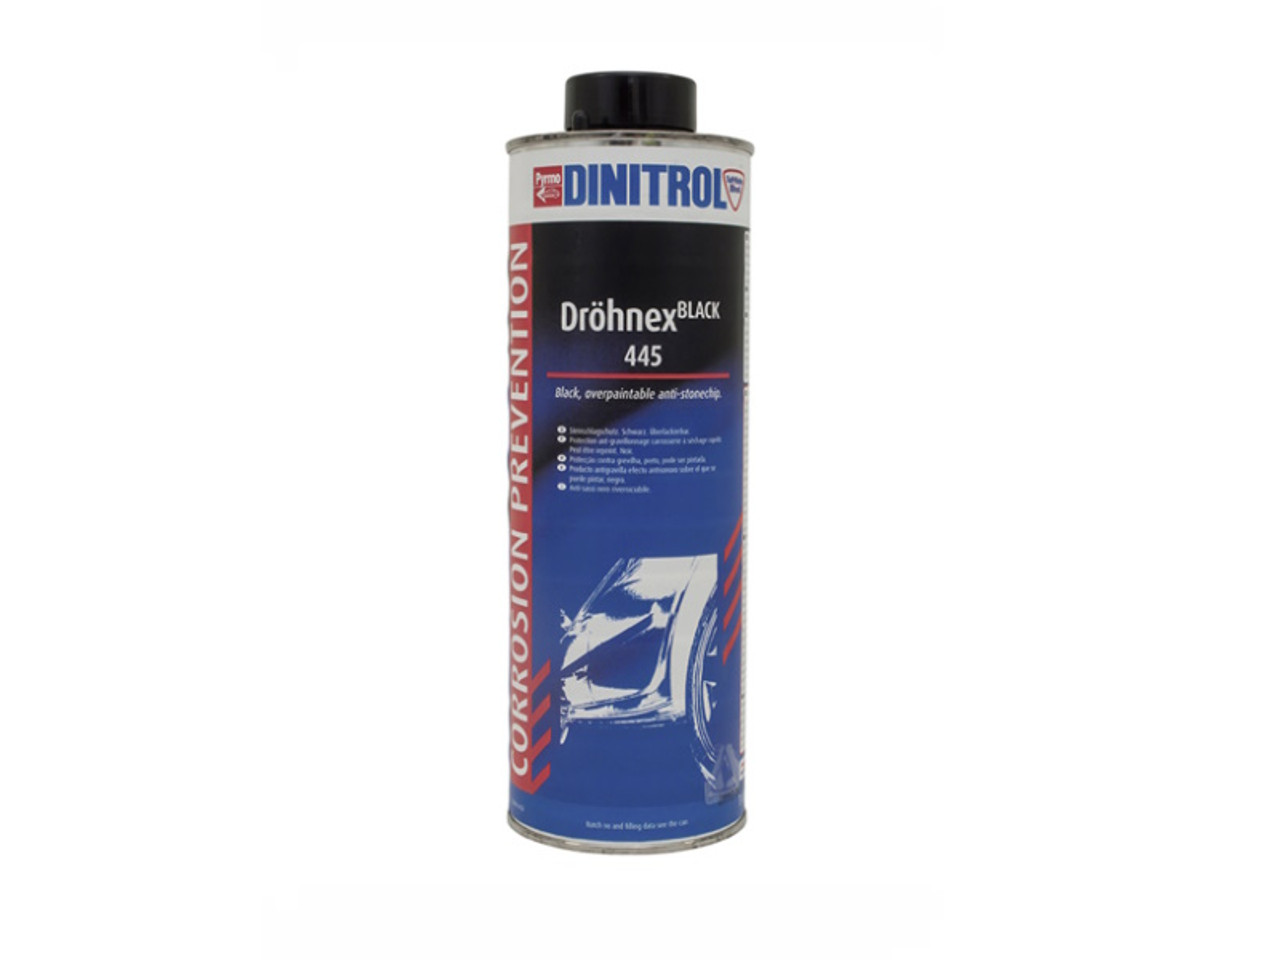 Dinitrol Drohnex 445 Over Paintable Anti Stone Chip and Corrosion Protection Coating 1 Litre Canister - DA1993